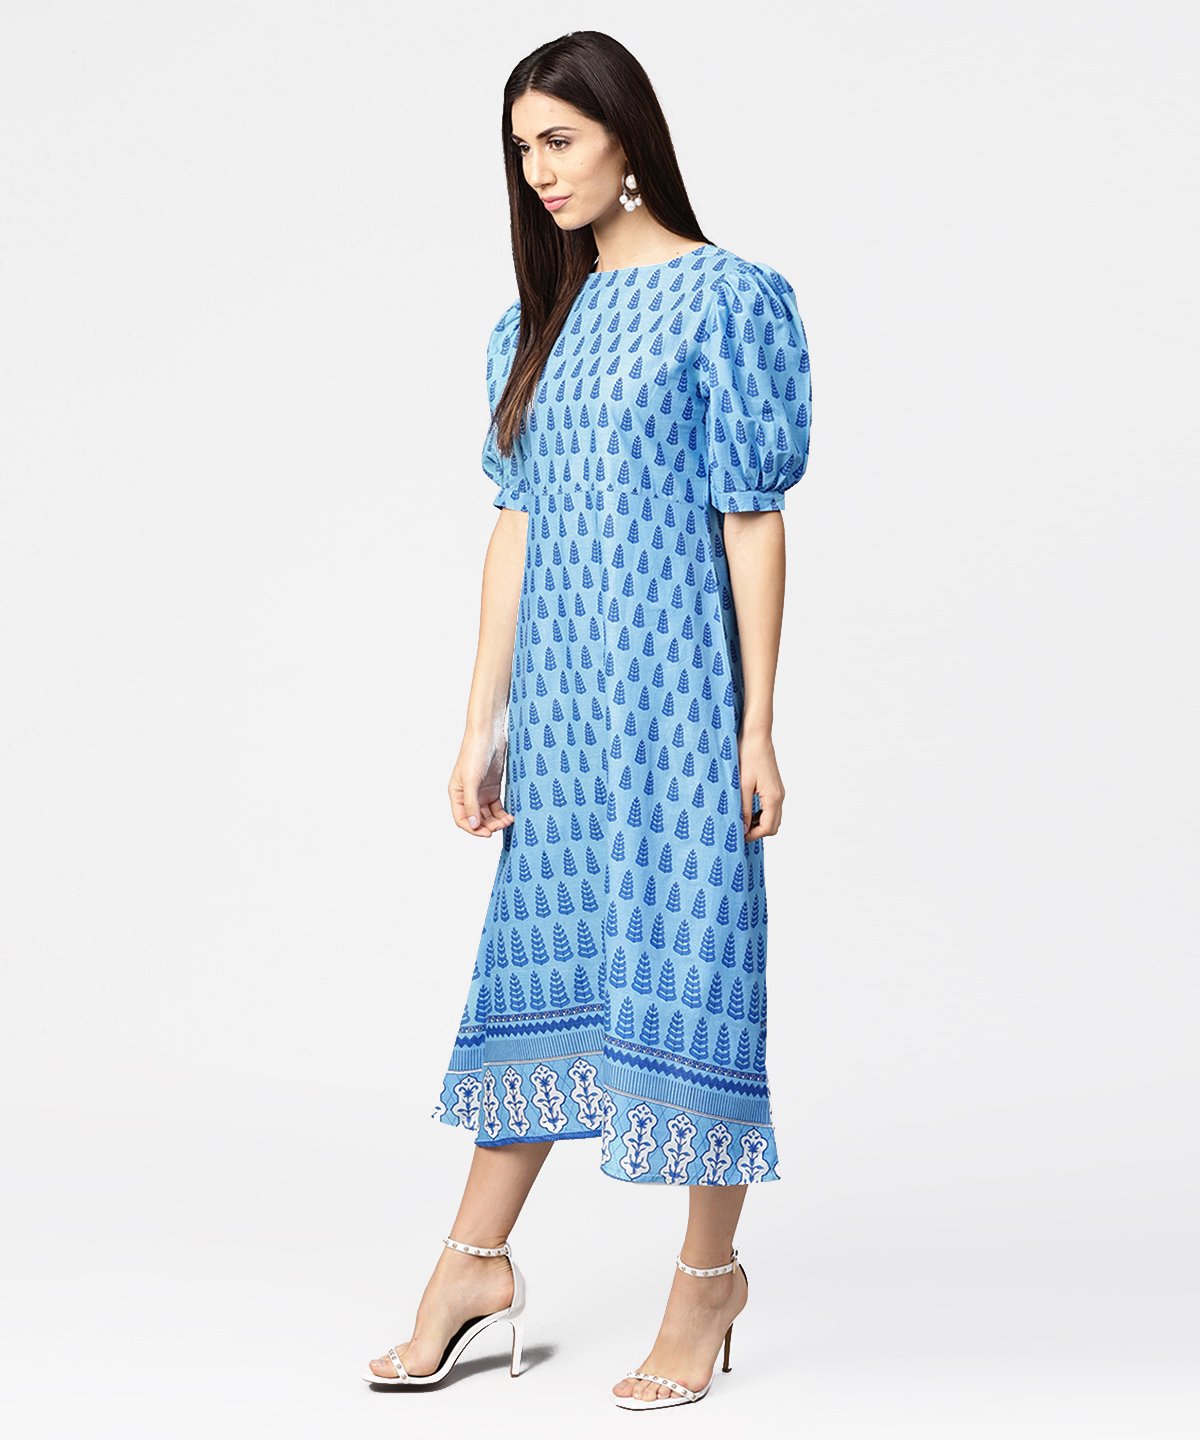 Women's Blue Printed Ballon Style Puff Sleeve Cotton A-Line Dress - Nayo Clothing